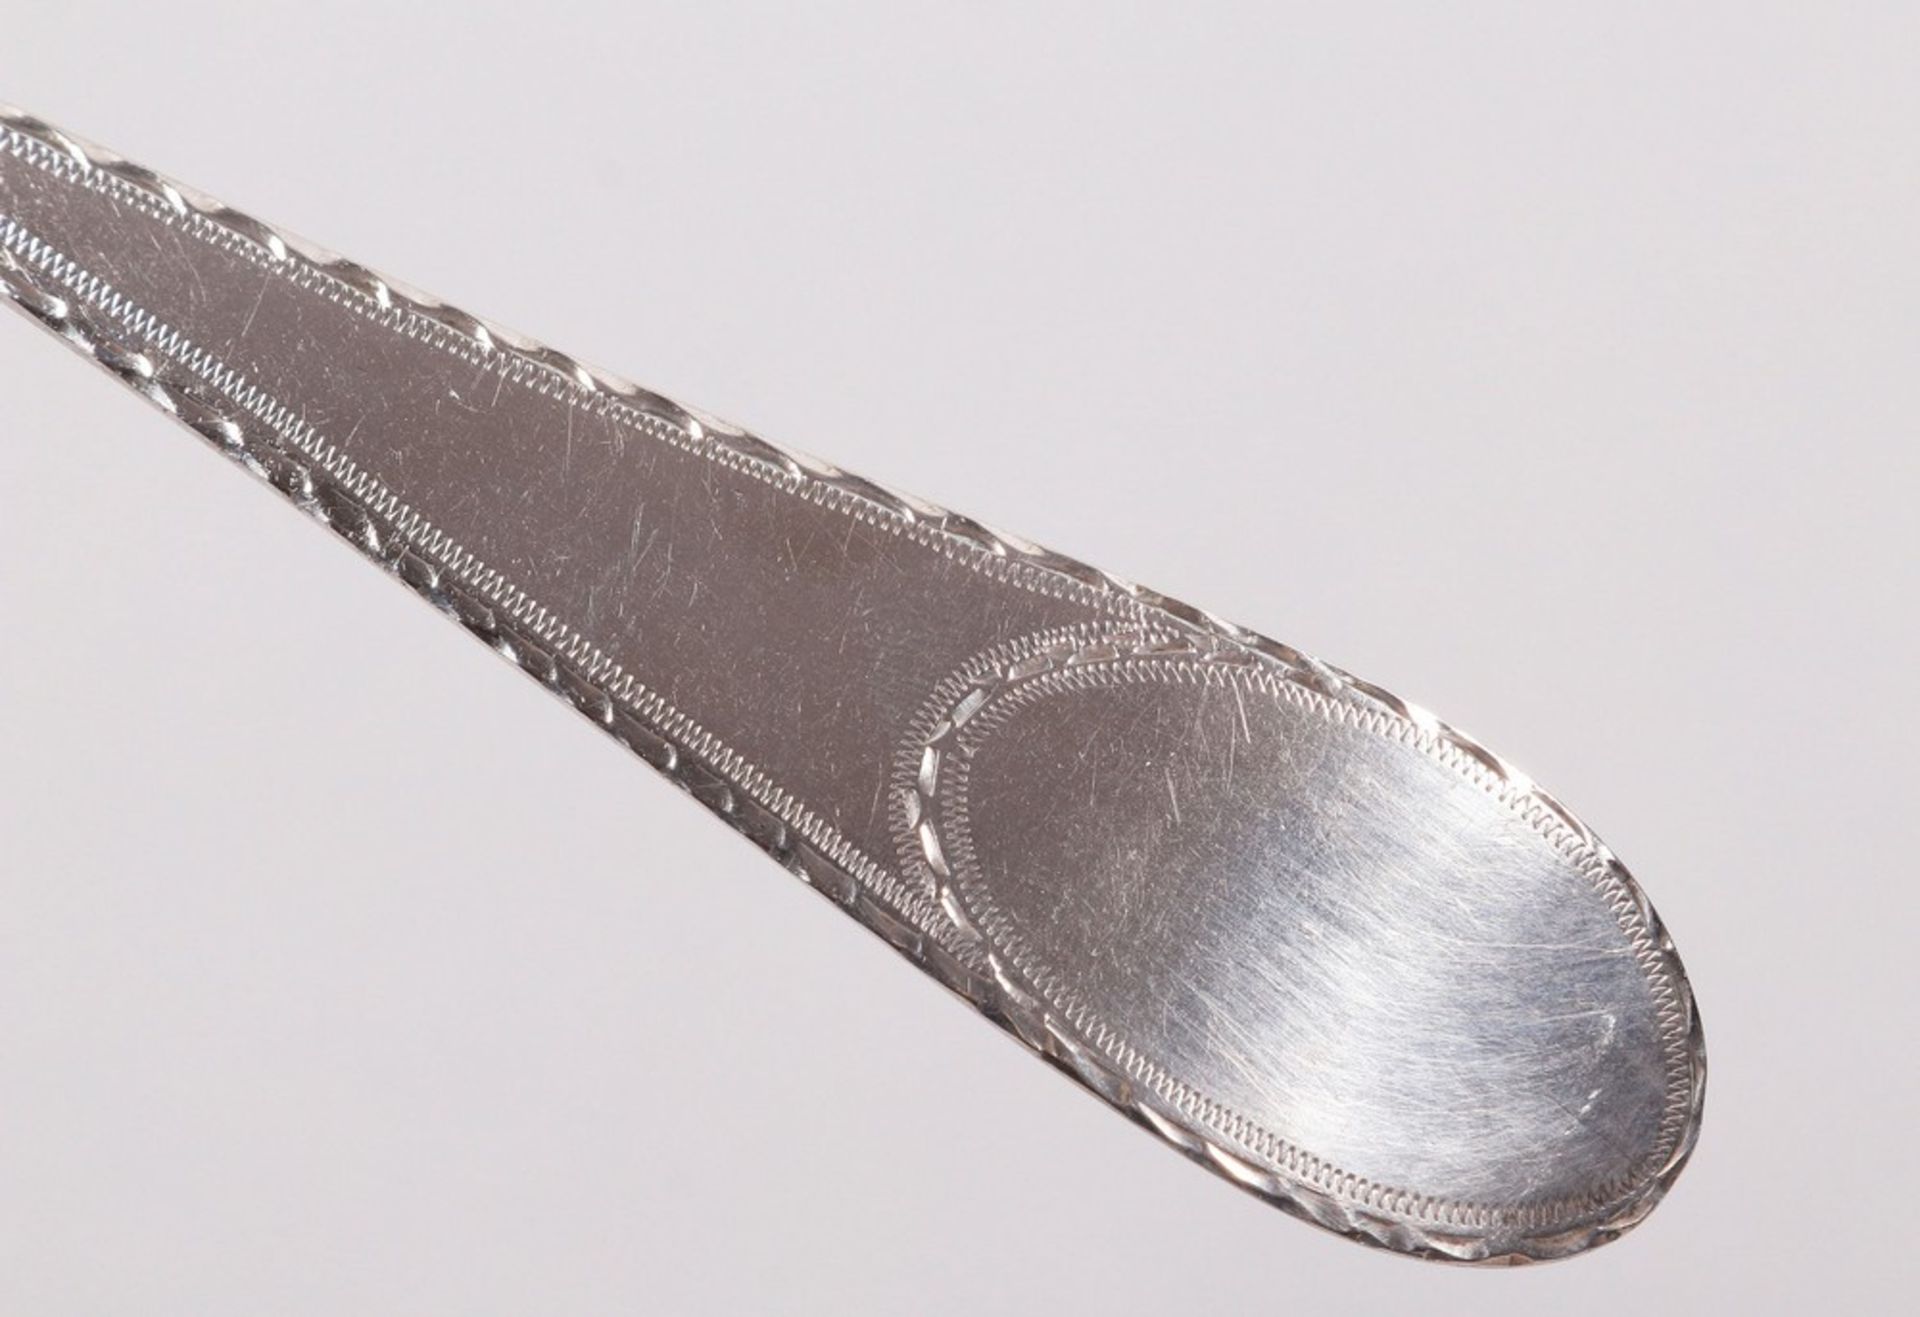 6 dining spoons, silver, German, c. 1800/10 - Image 5 of 7